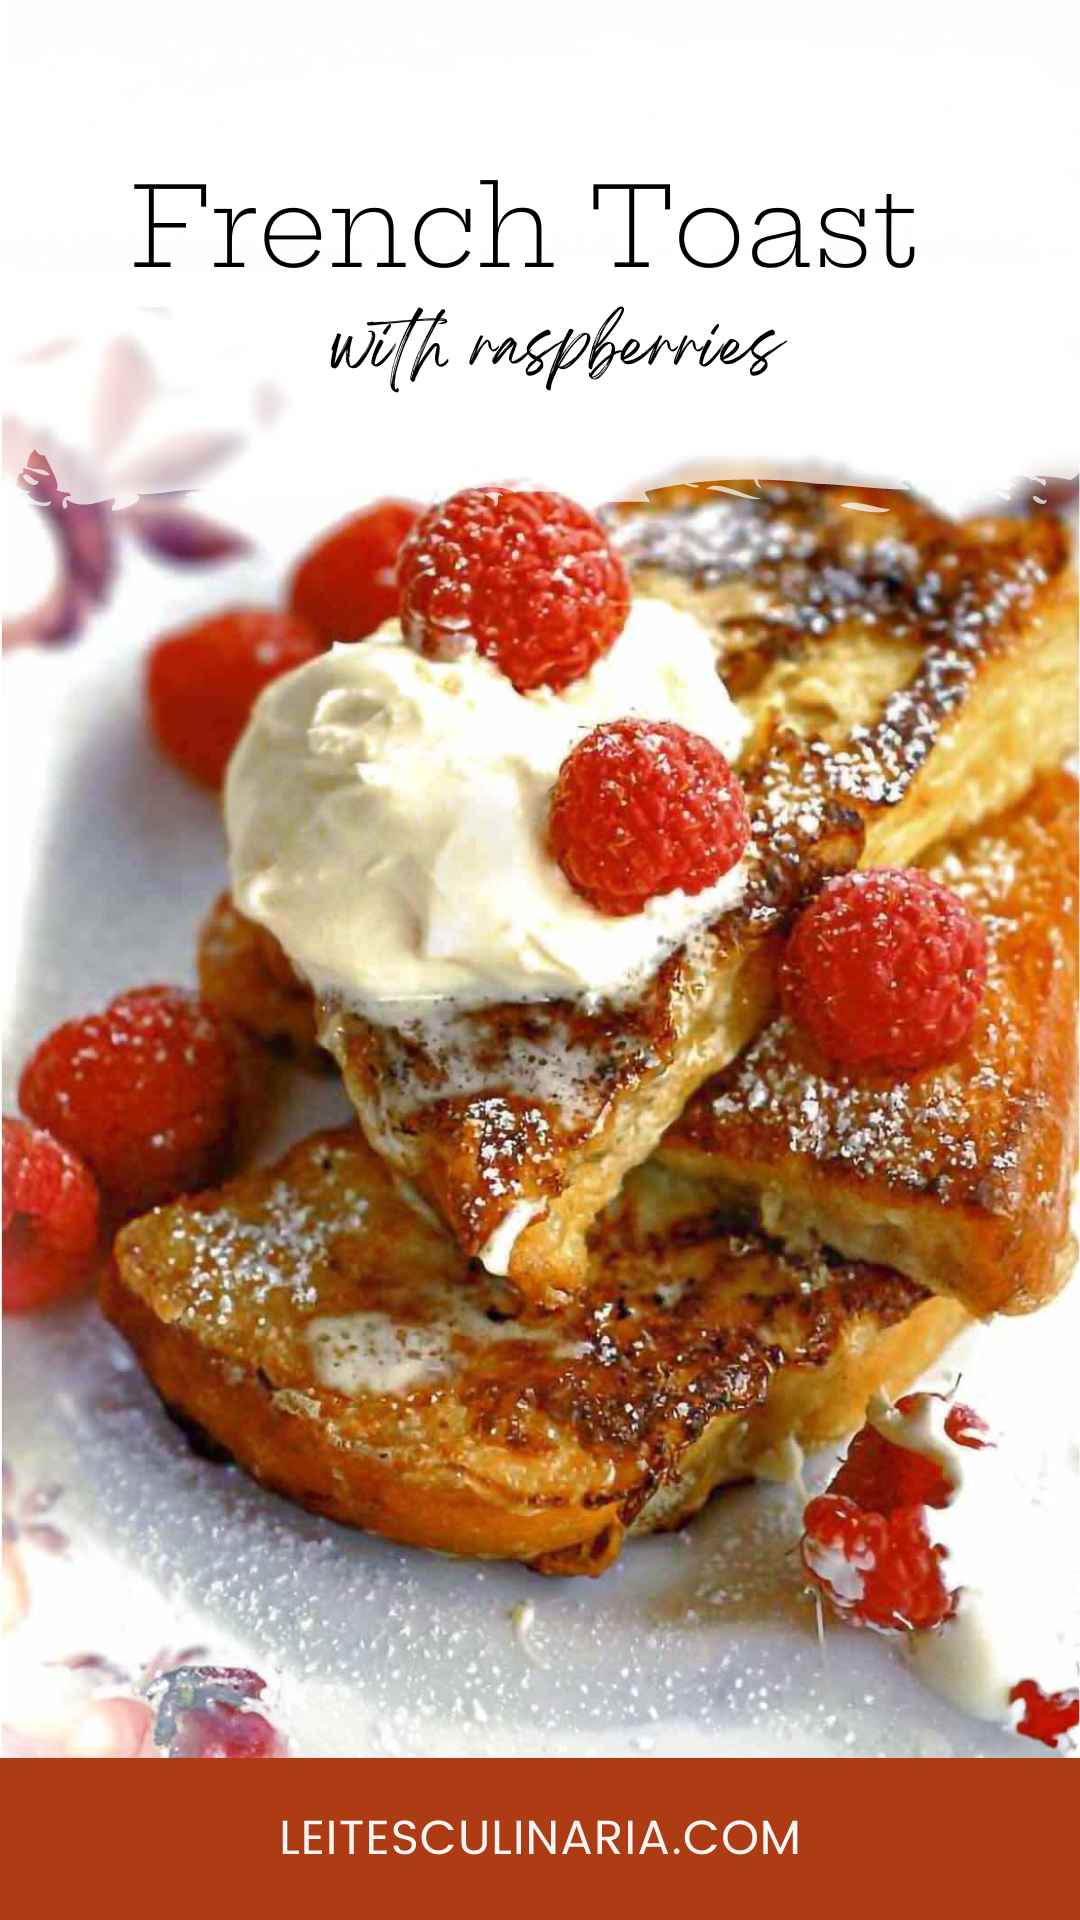 Slices of French toast stacked on a plate, topped with fresh raspberries, crème fraîche, and powdered sugar.